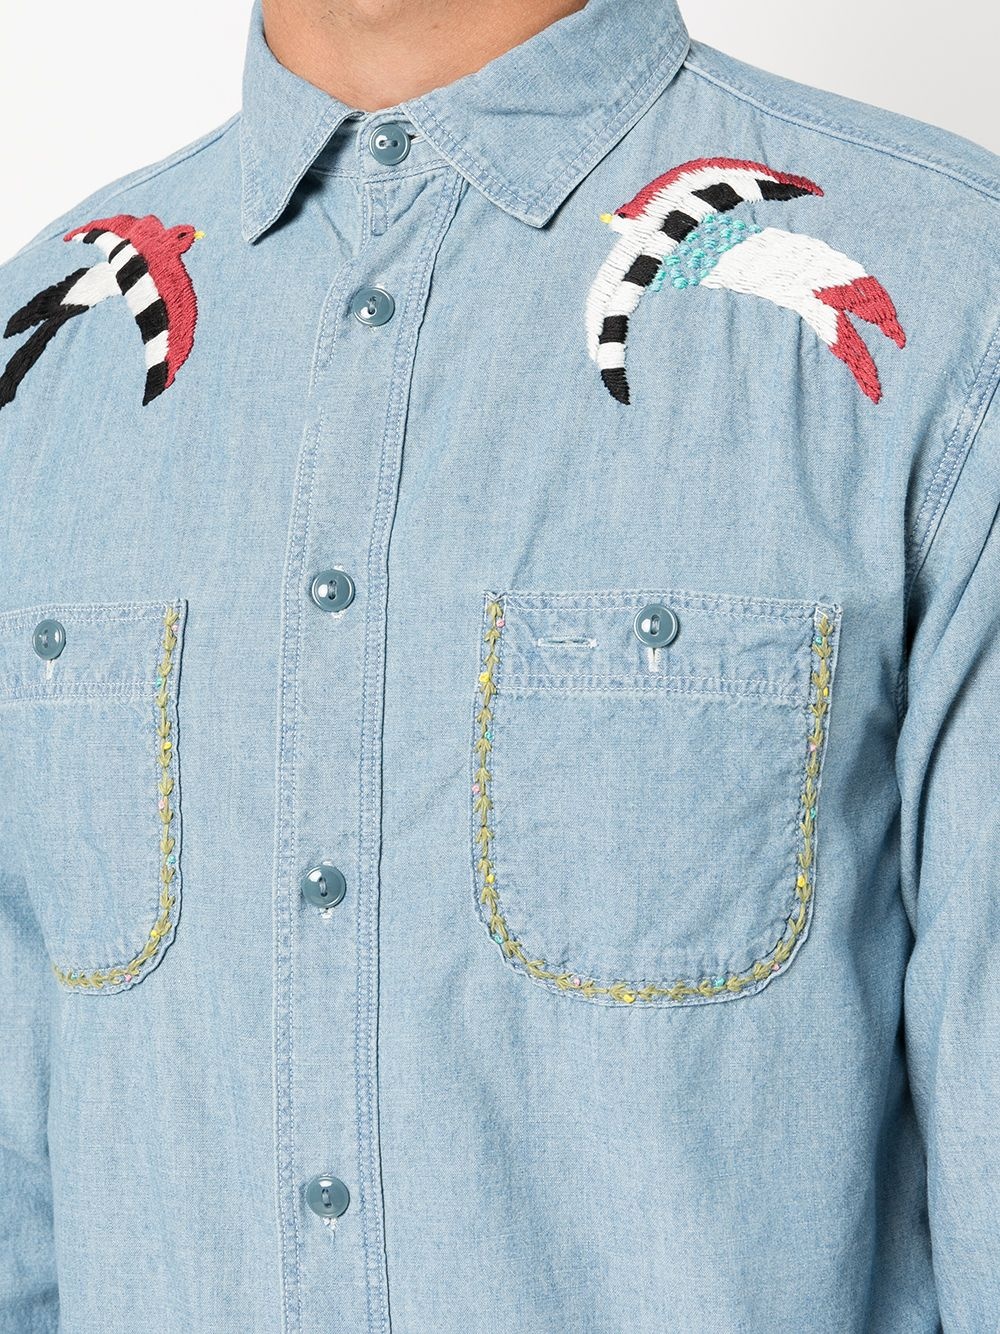 swallow-embroidered work shirt - 5